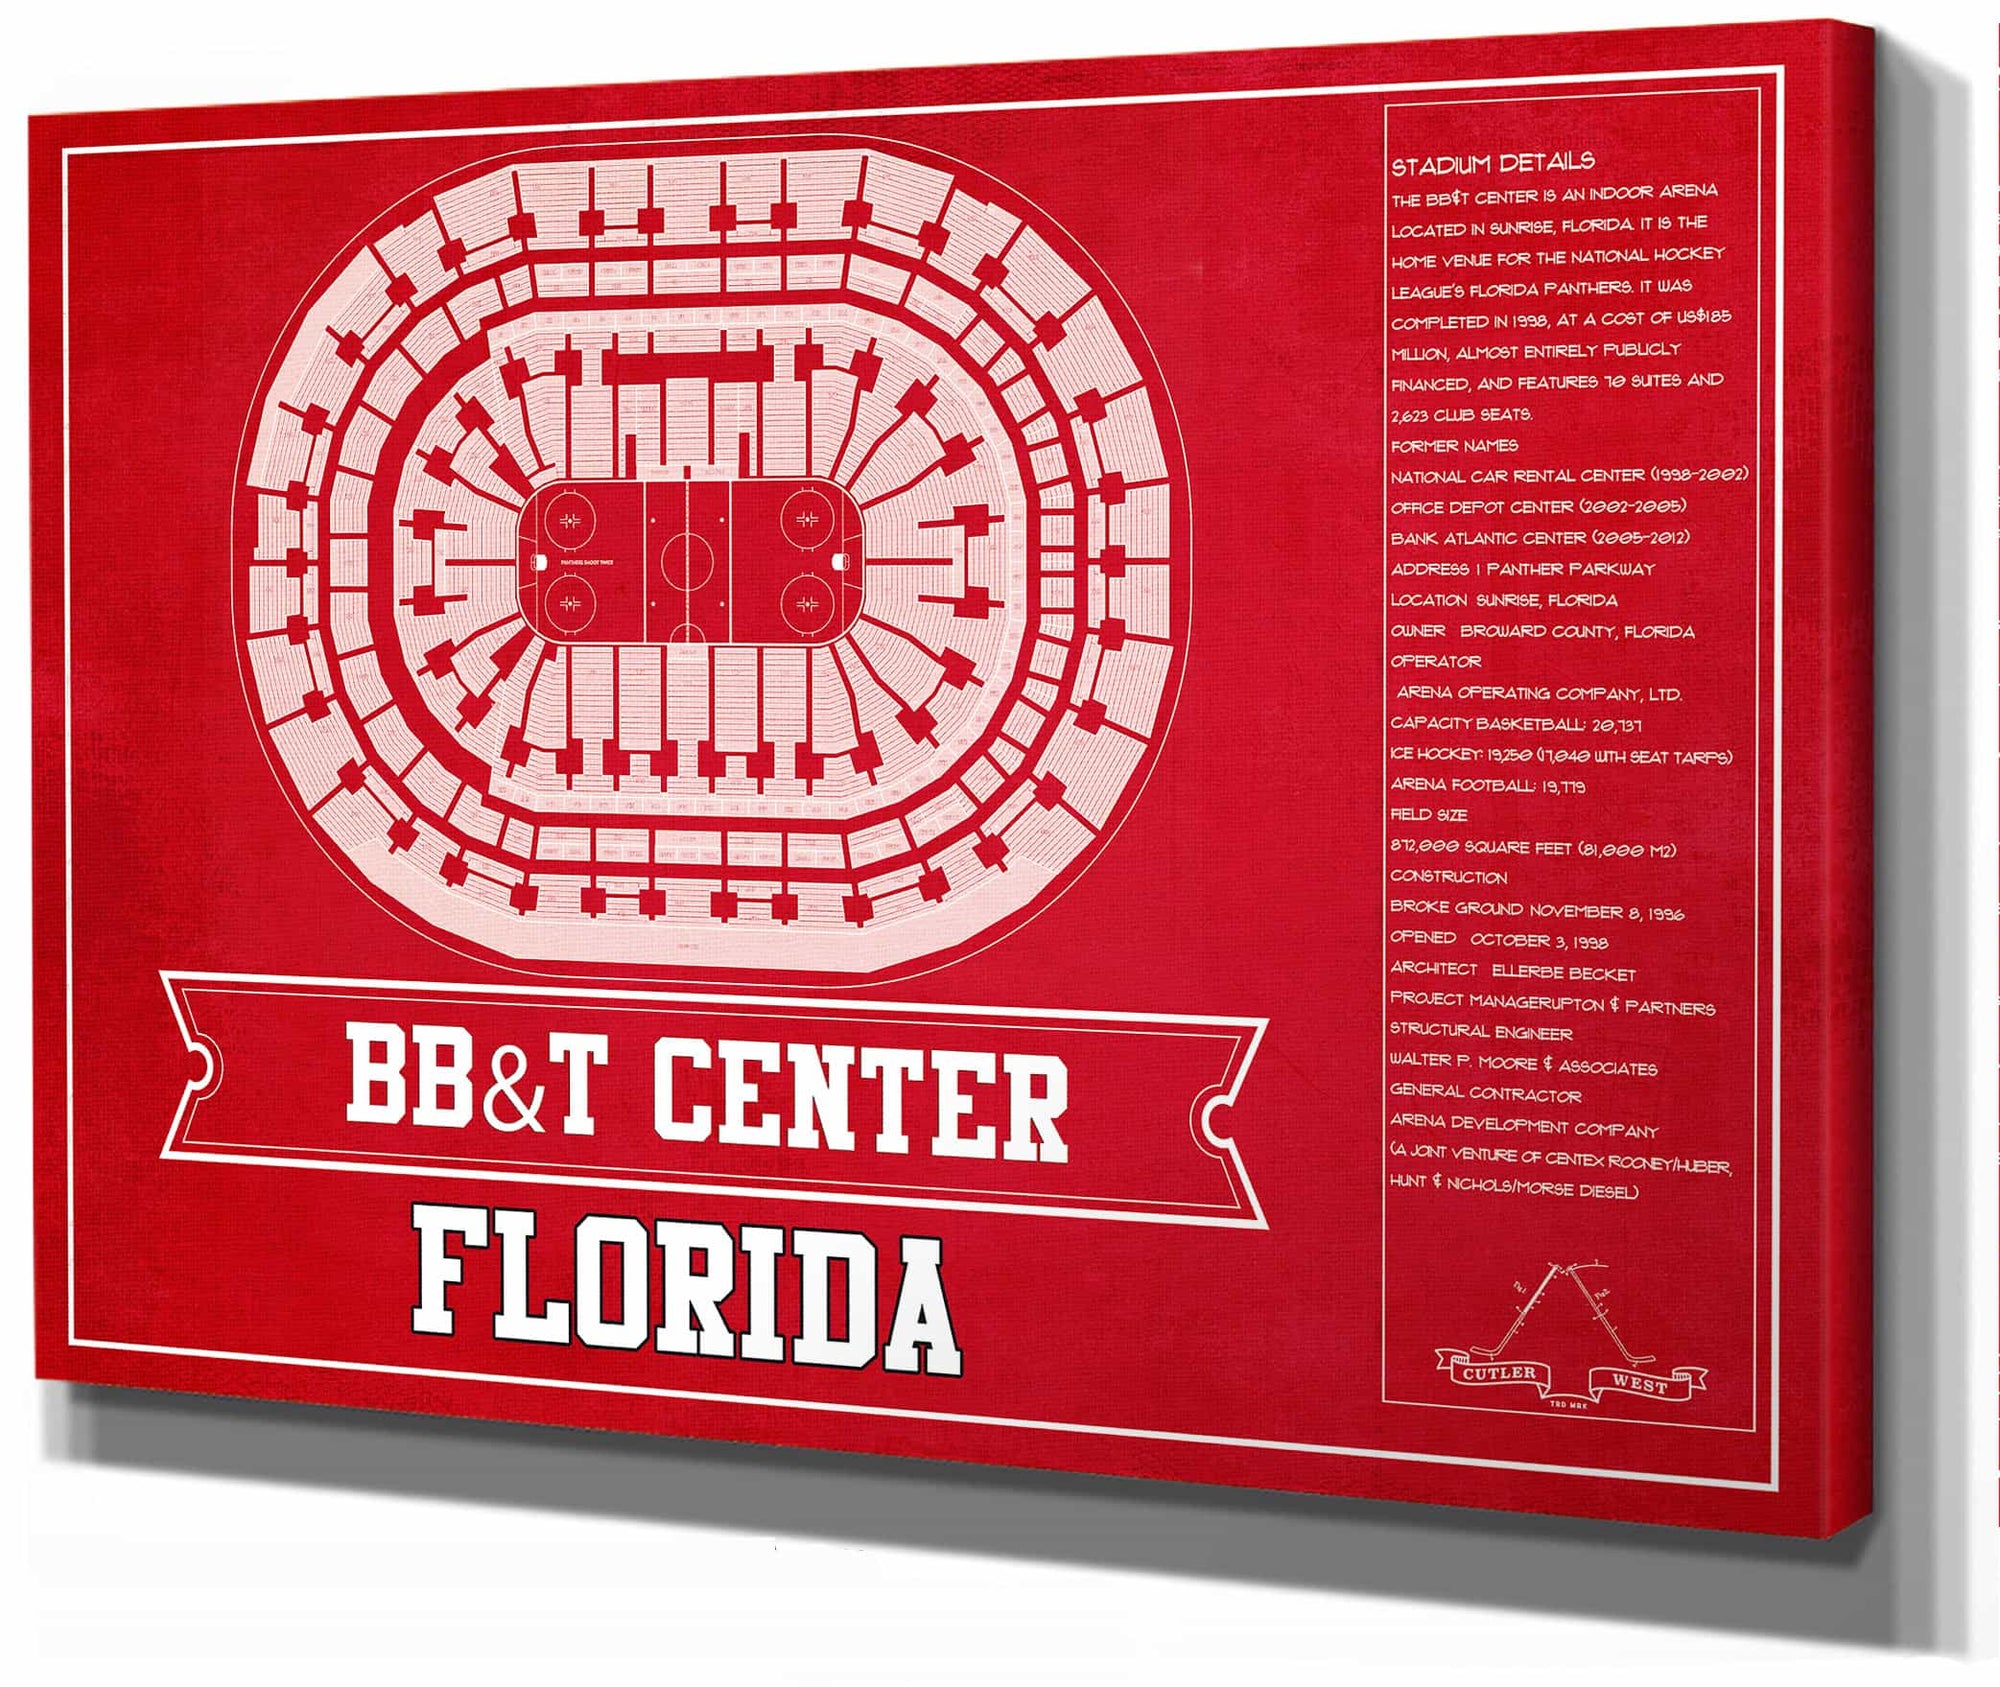 Florida Panthers BB&T Center Seating Chart - Vintage Hockey Team Color Print